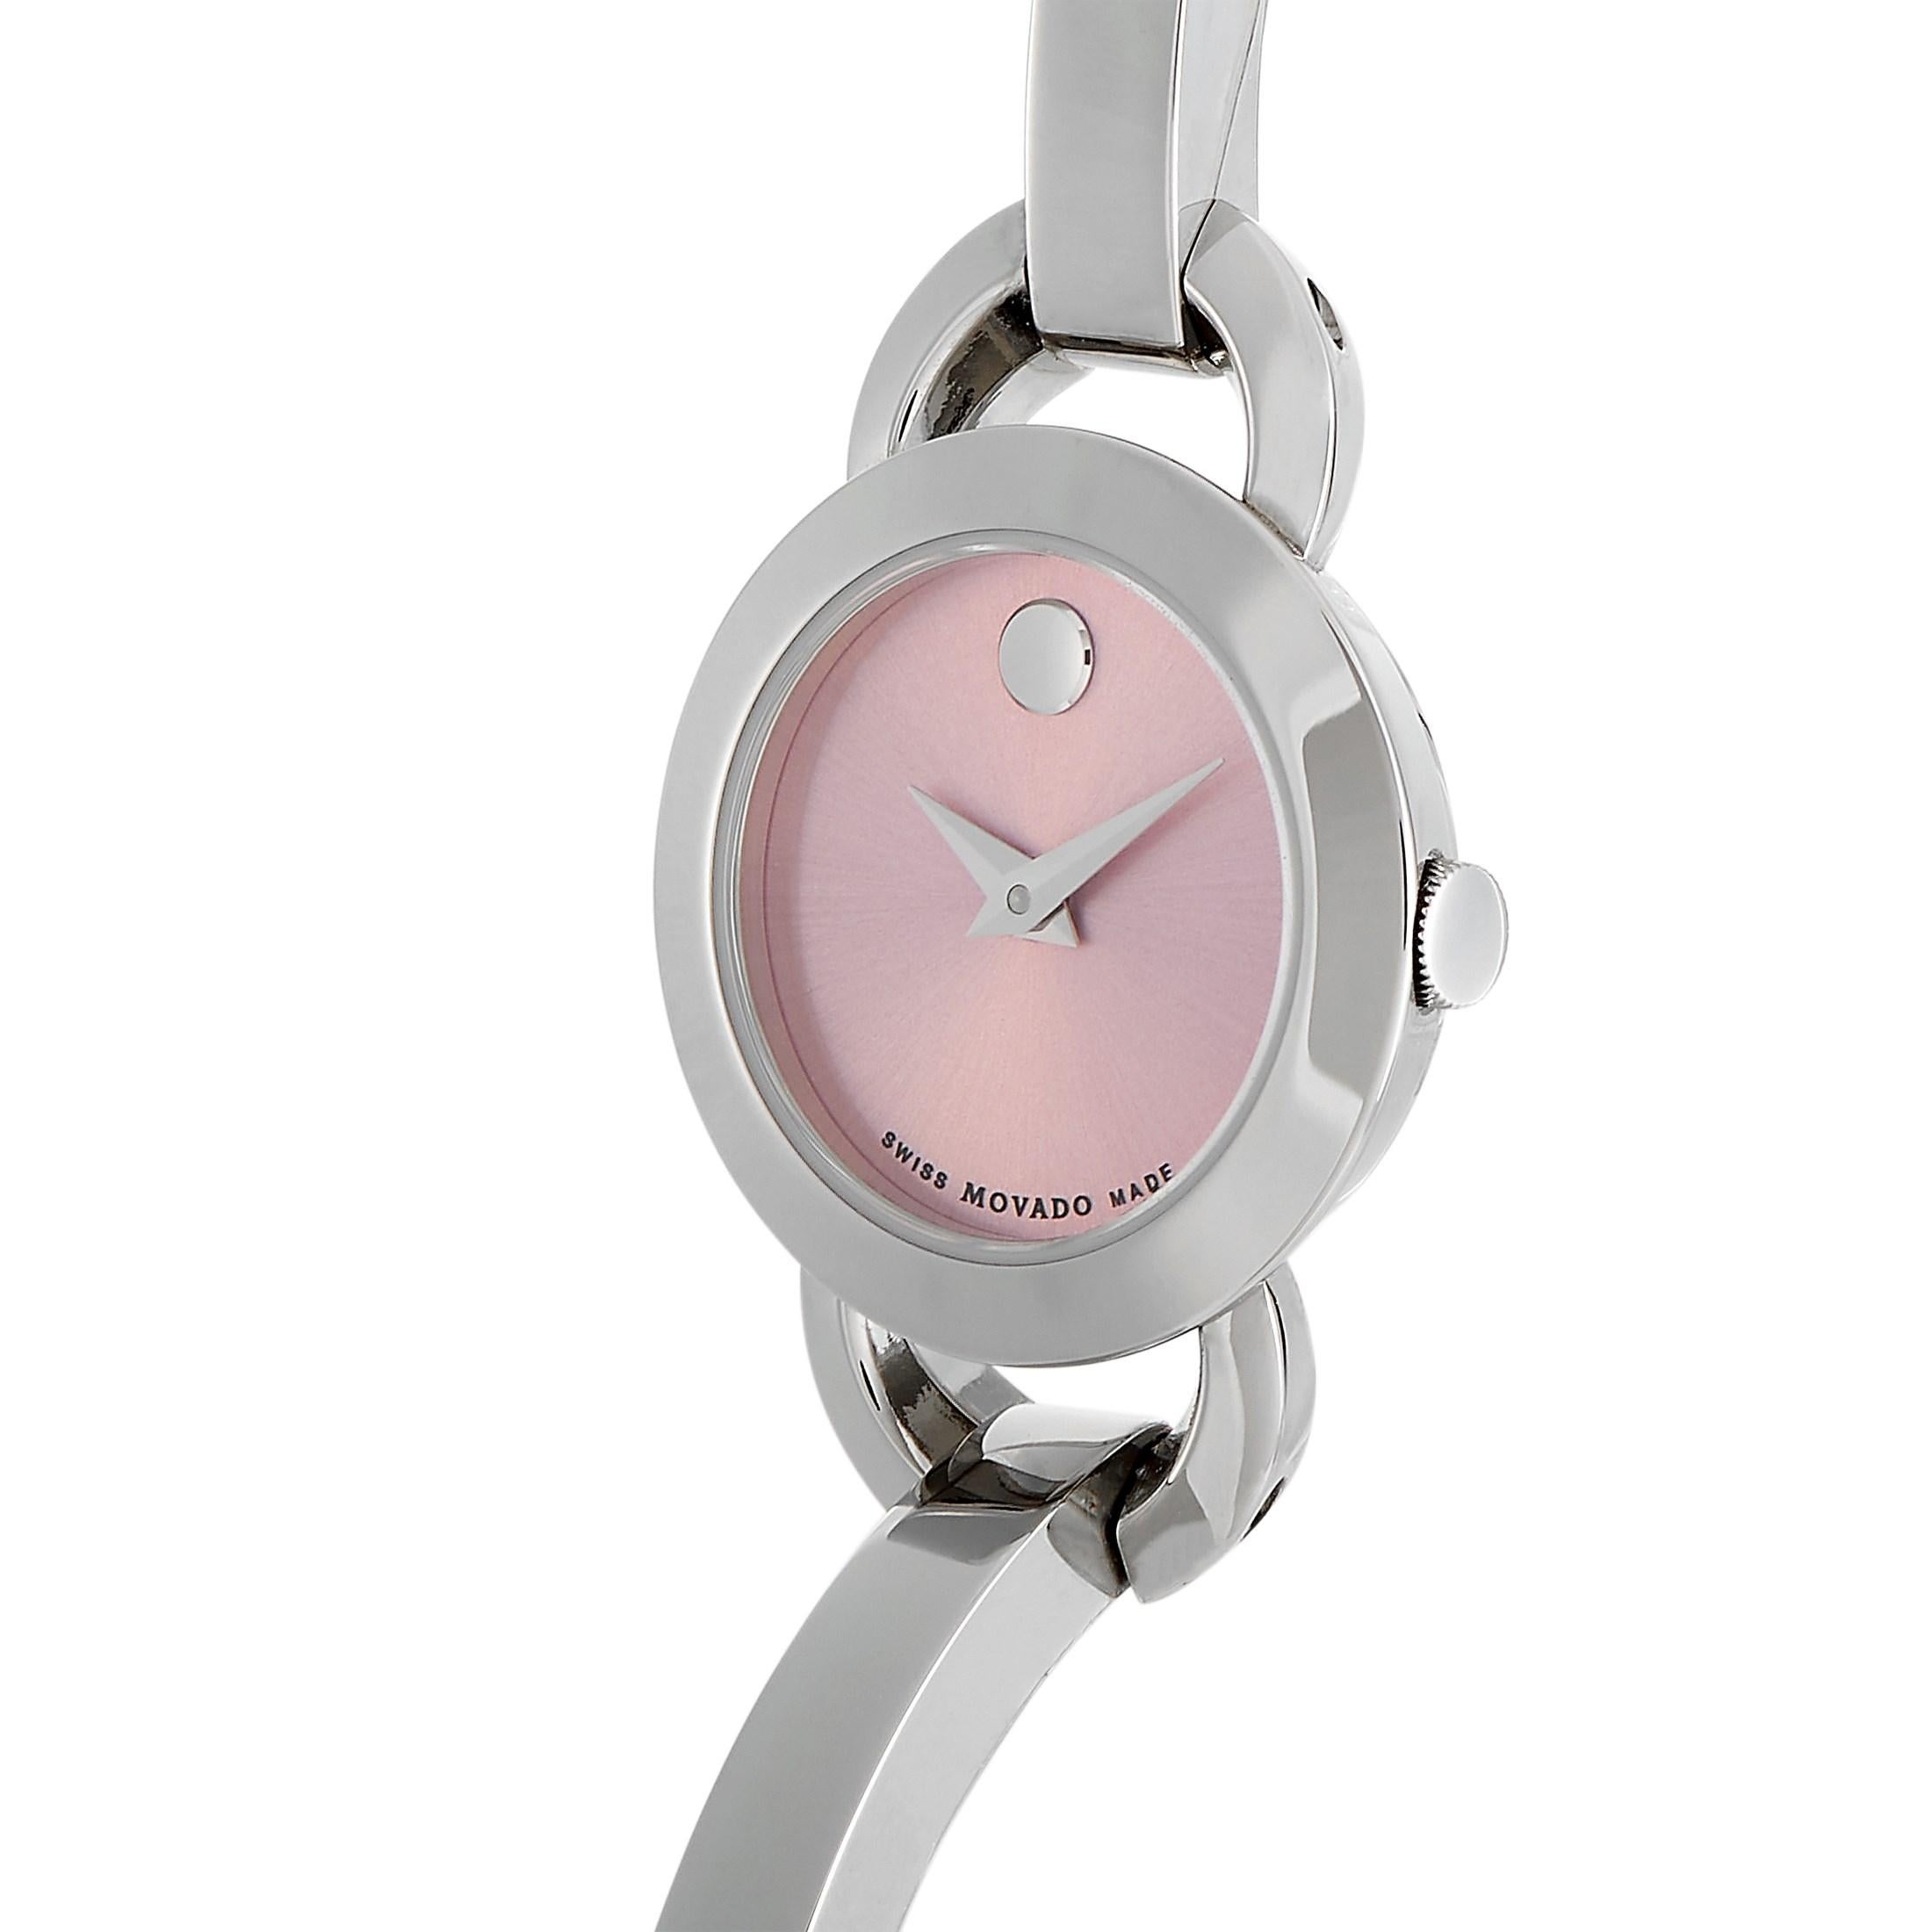 The Movado Rondiro watch, reference number 606797, comes with a stainless steel case that measures 22 mm in diameter. The case is presented on a stainless steel bangle-style bracelet, secured on the wrist with a fold-over clasp. This model is